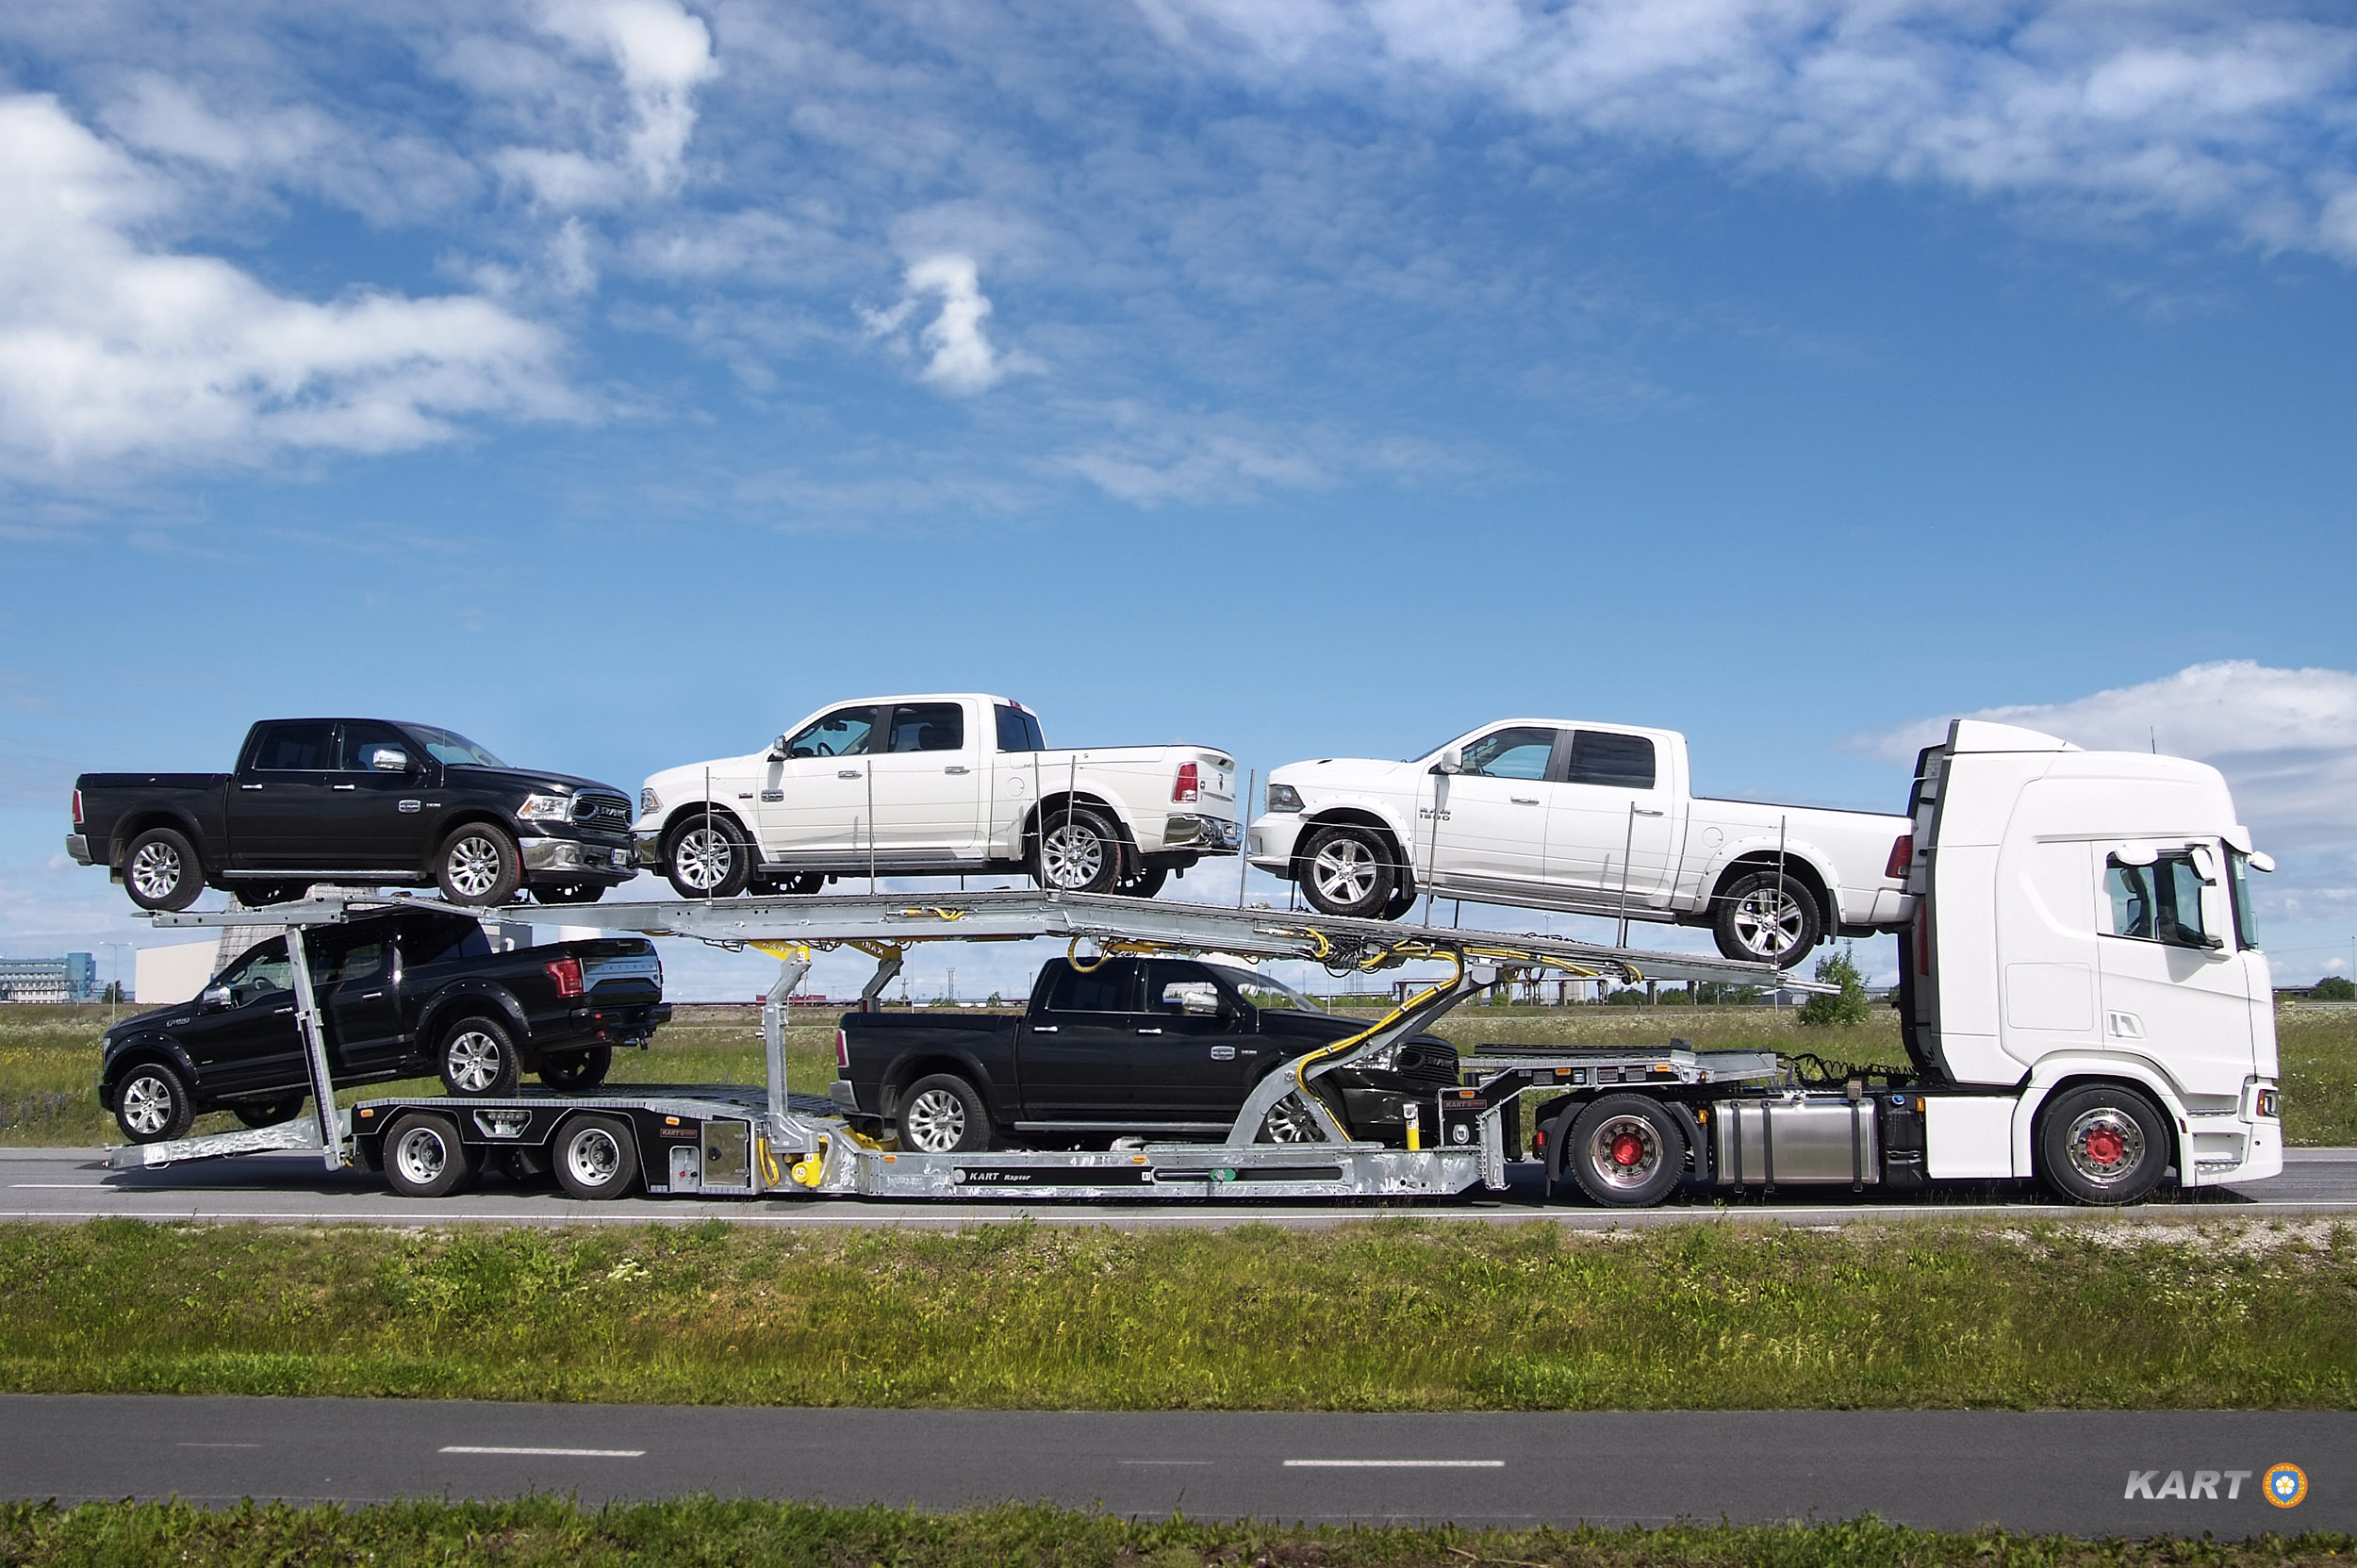 KART Performance Trailers: Car haulers and special solution 